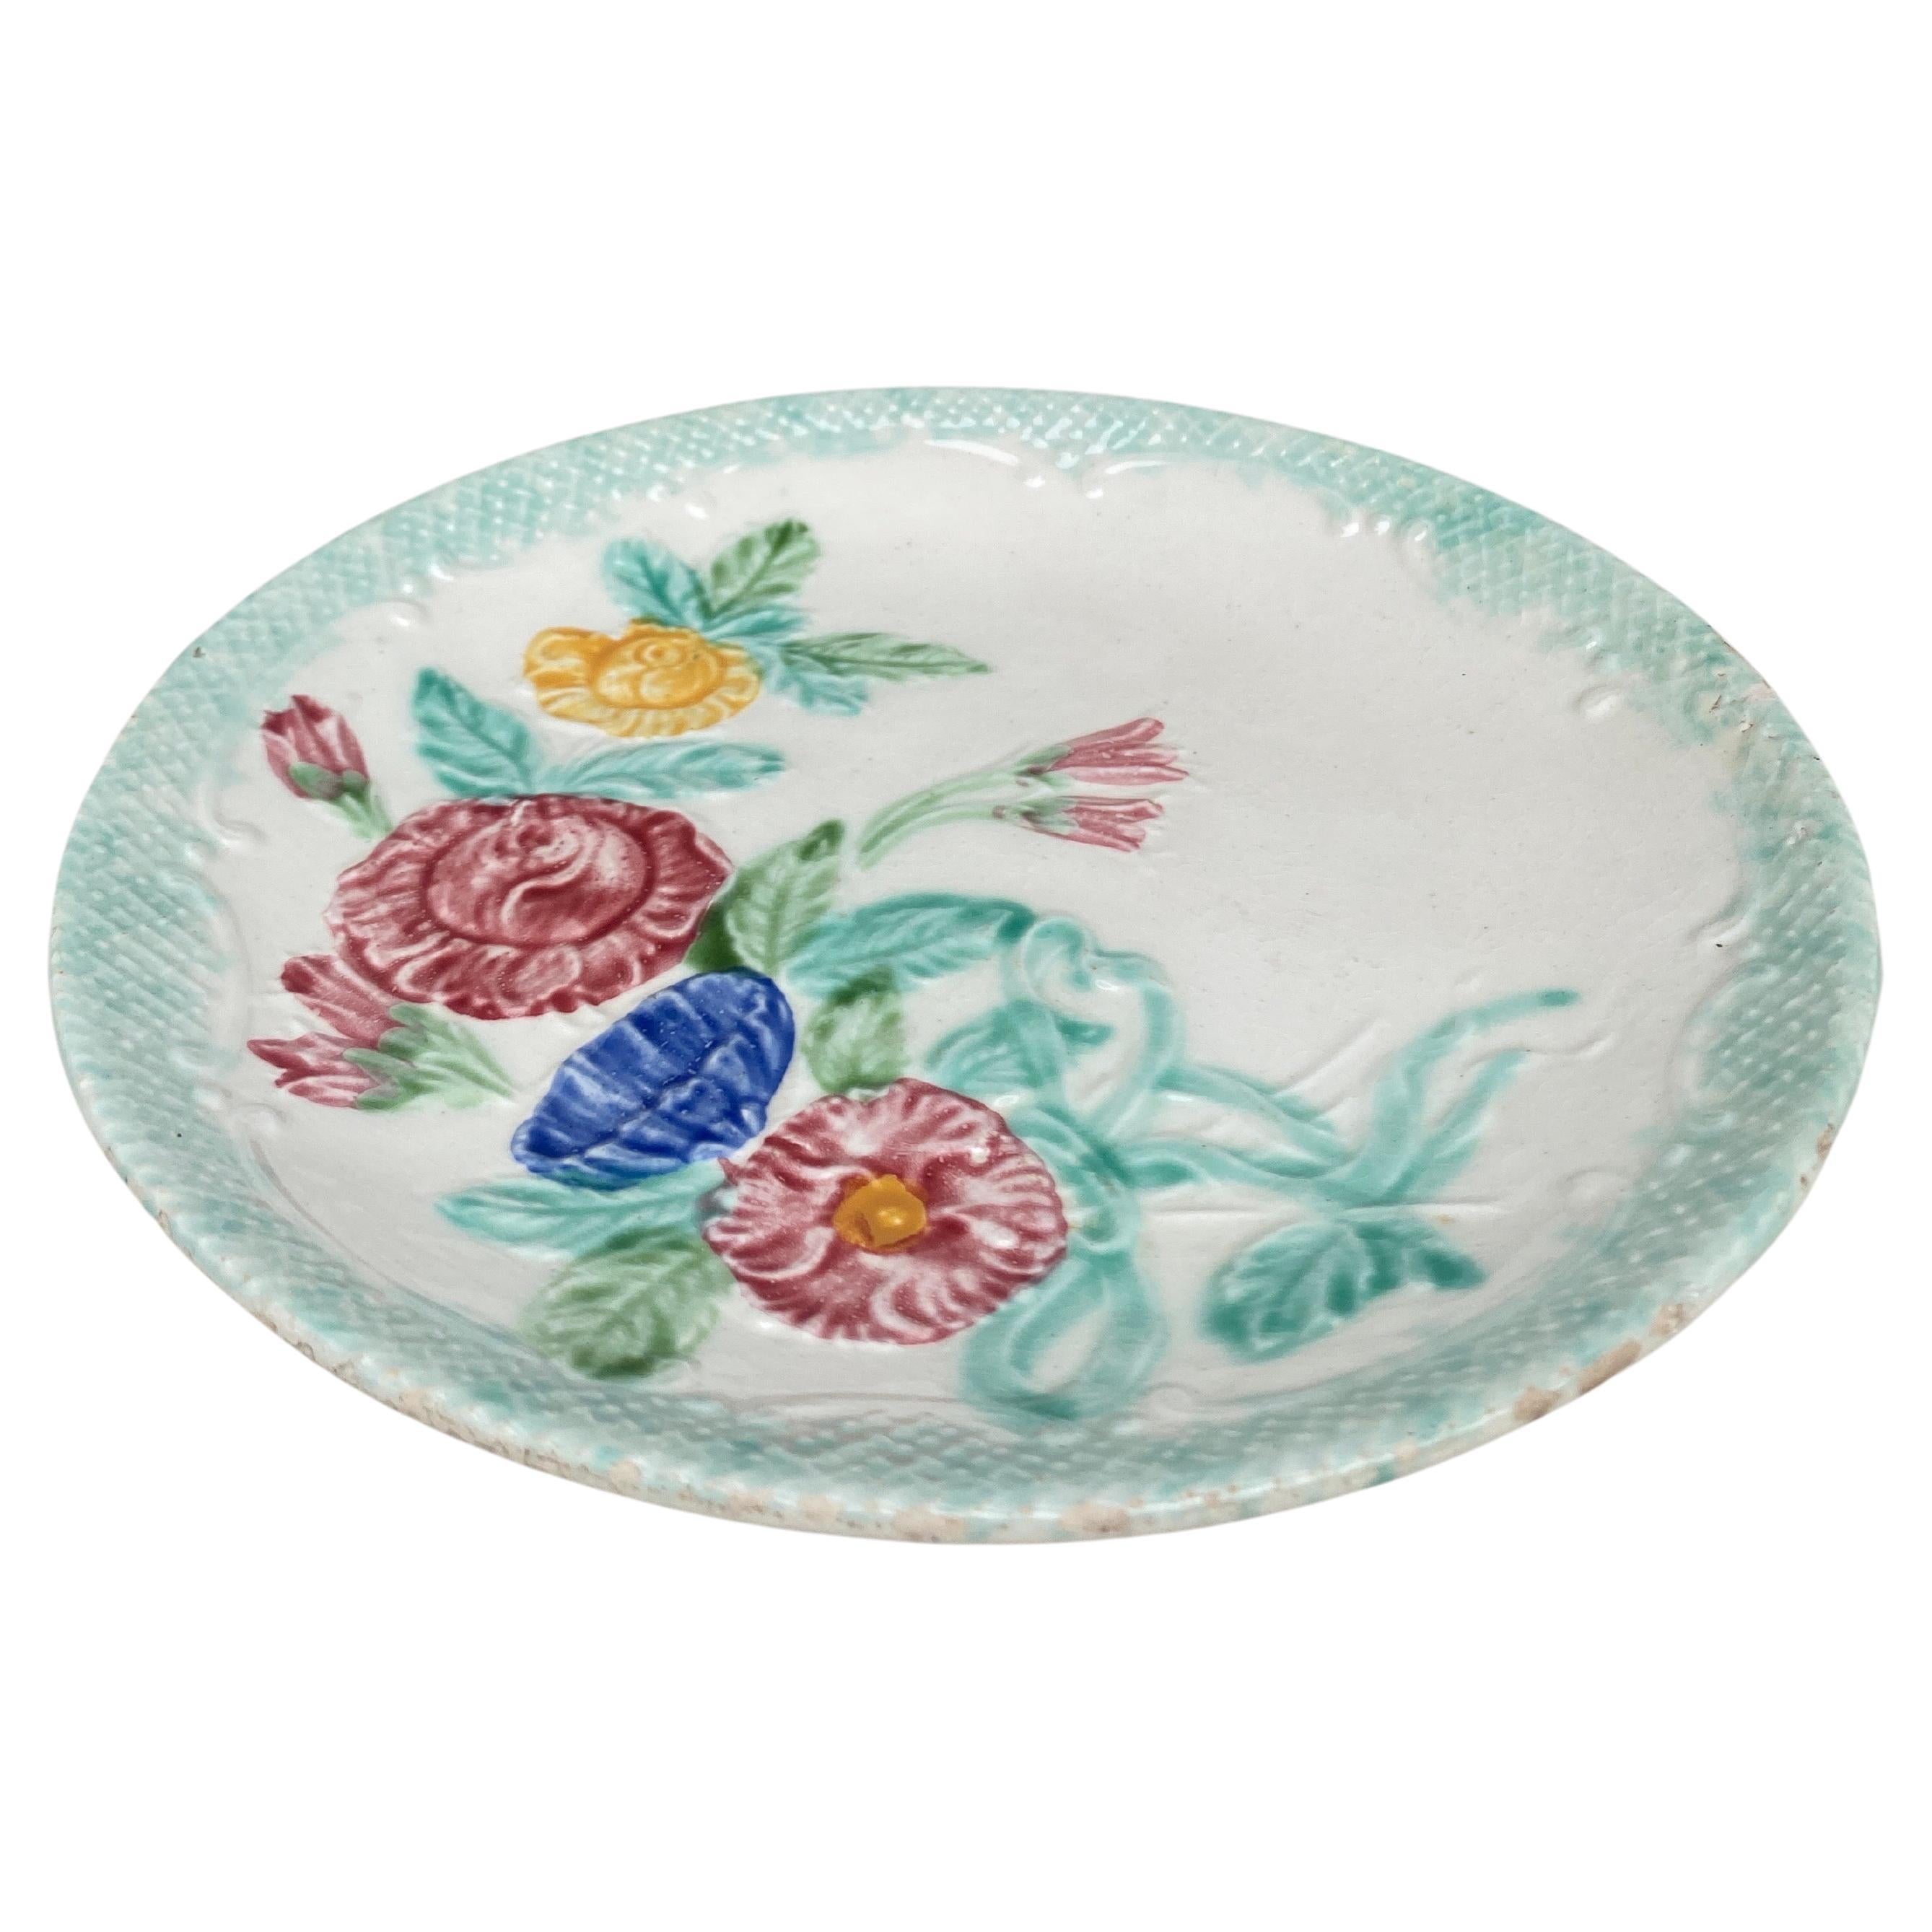 French Majolica Roses & Flowers Plate Salins, Circa 1890.